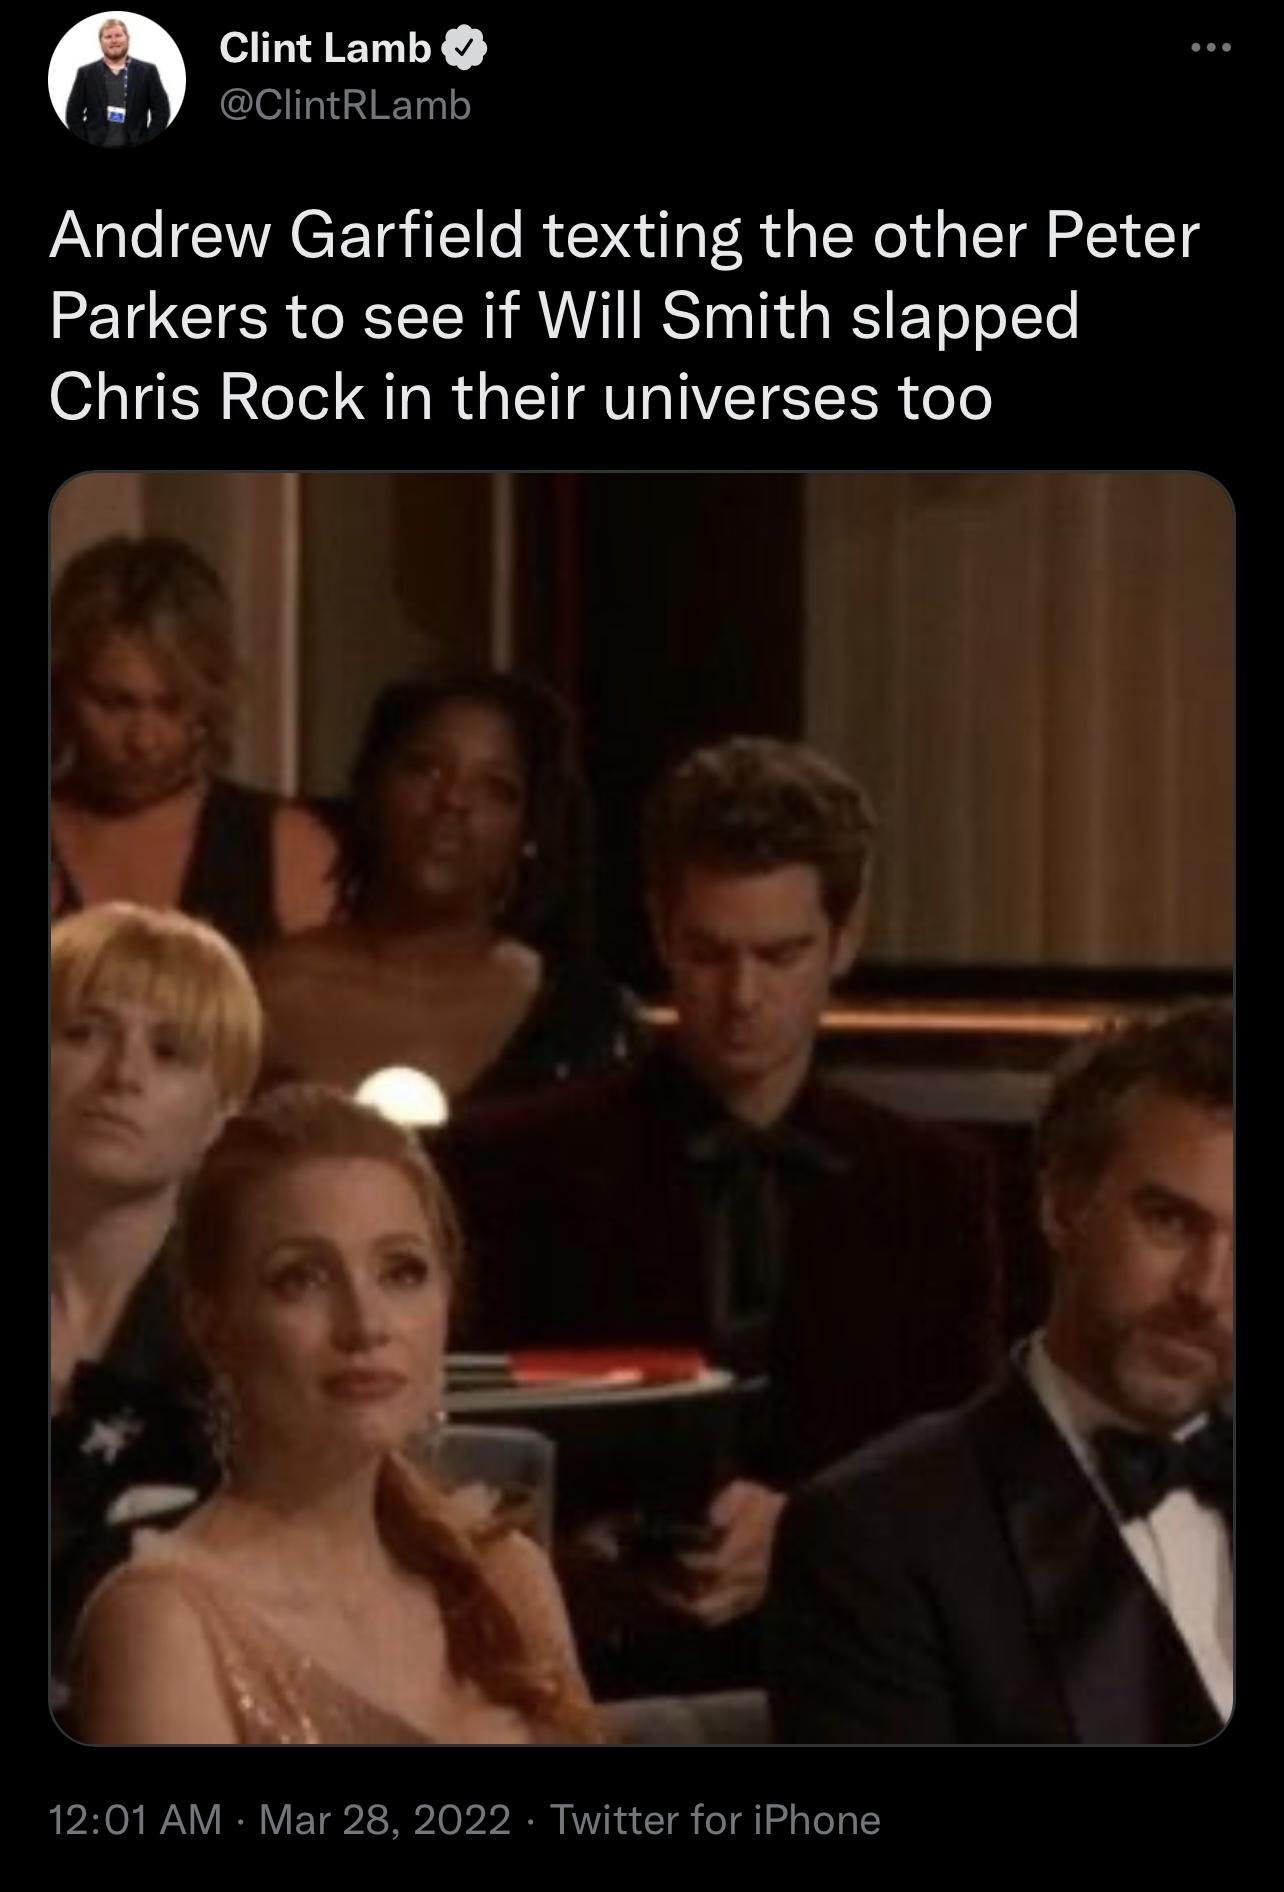 funny memes - dank memes - photo caption - ... Clint Lamb Andrew Garfield texting the other Peter Parkers to see if Will Smith slapped Chris Rock in their universes too Twitter for iPhone